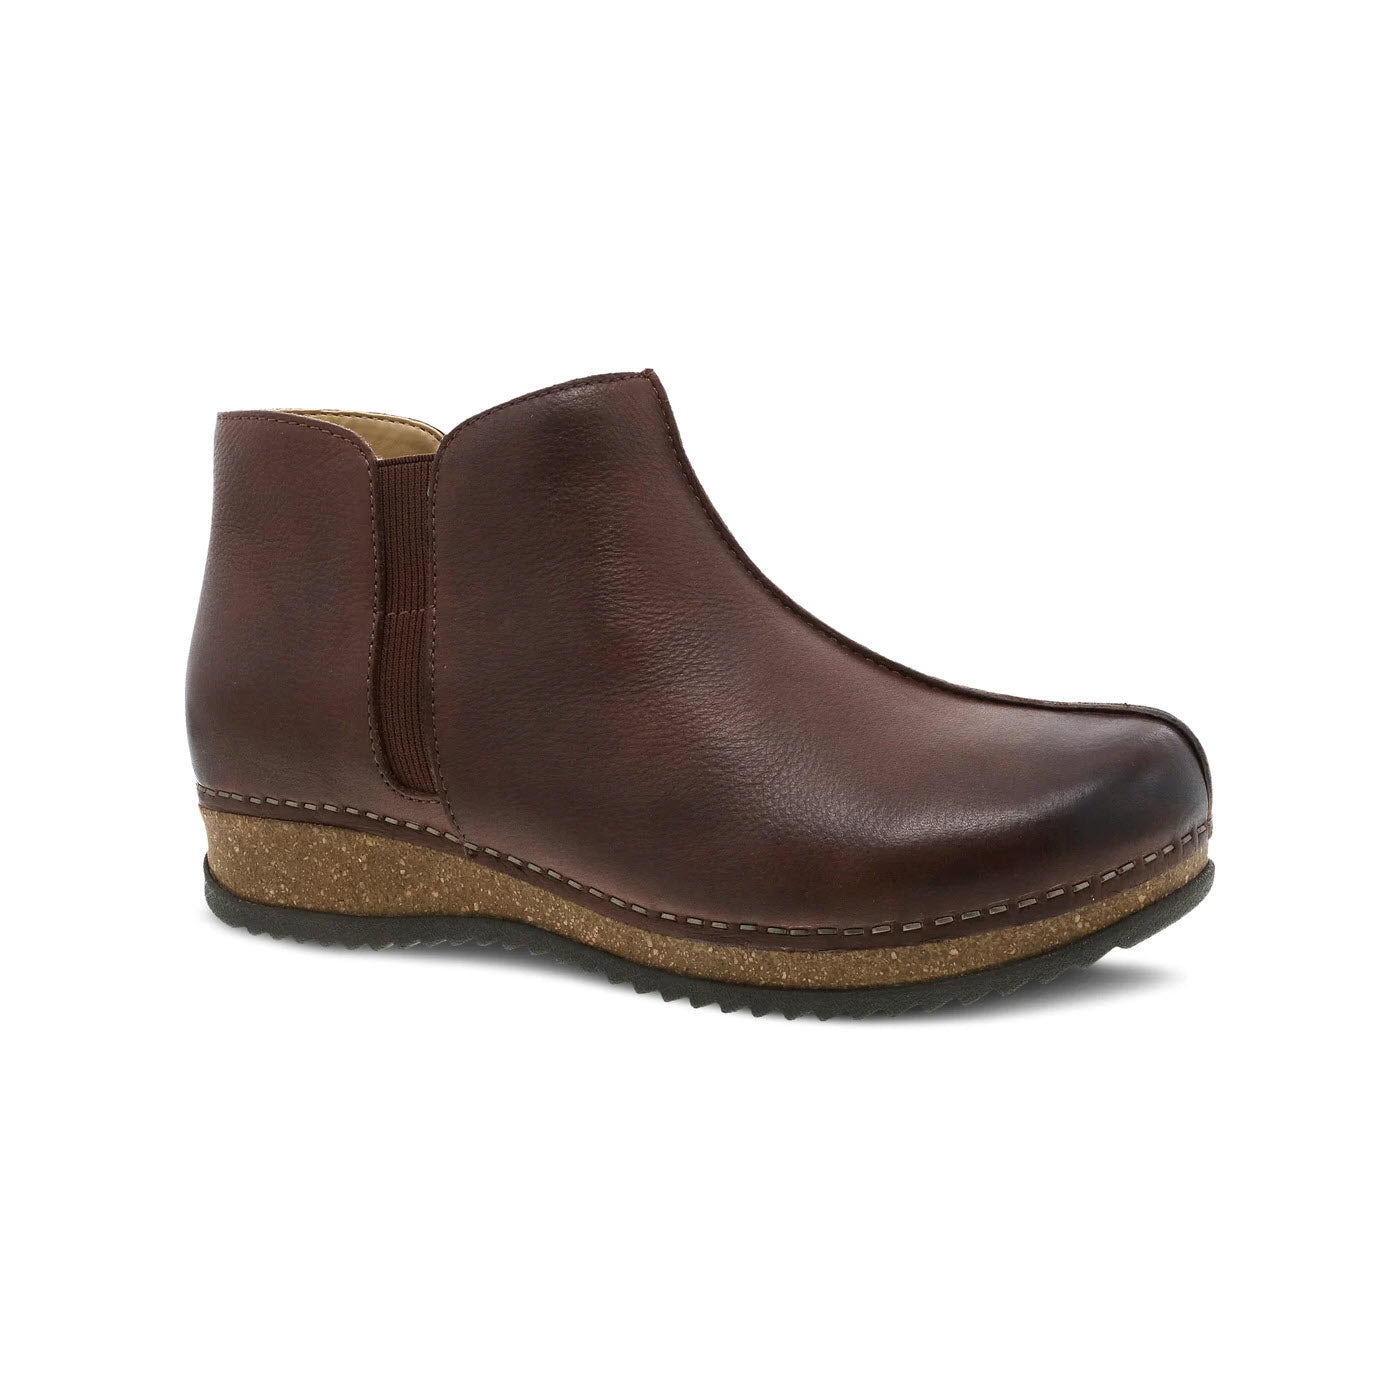 A single Dansko Makara bootie crafted from brown waxy leather with elastic side panels and a low, flat rubber sole, isolated on a white background.